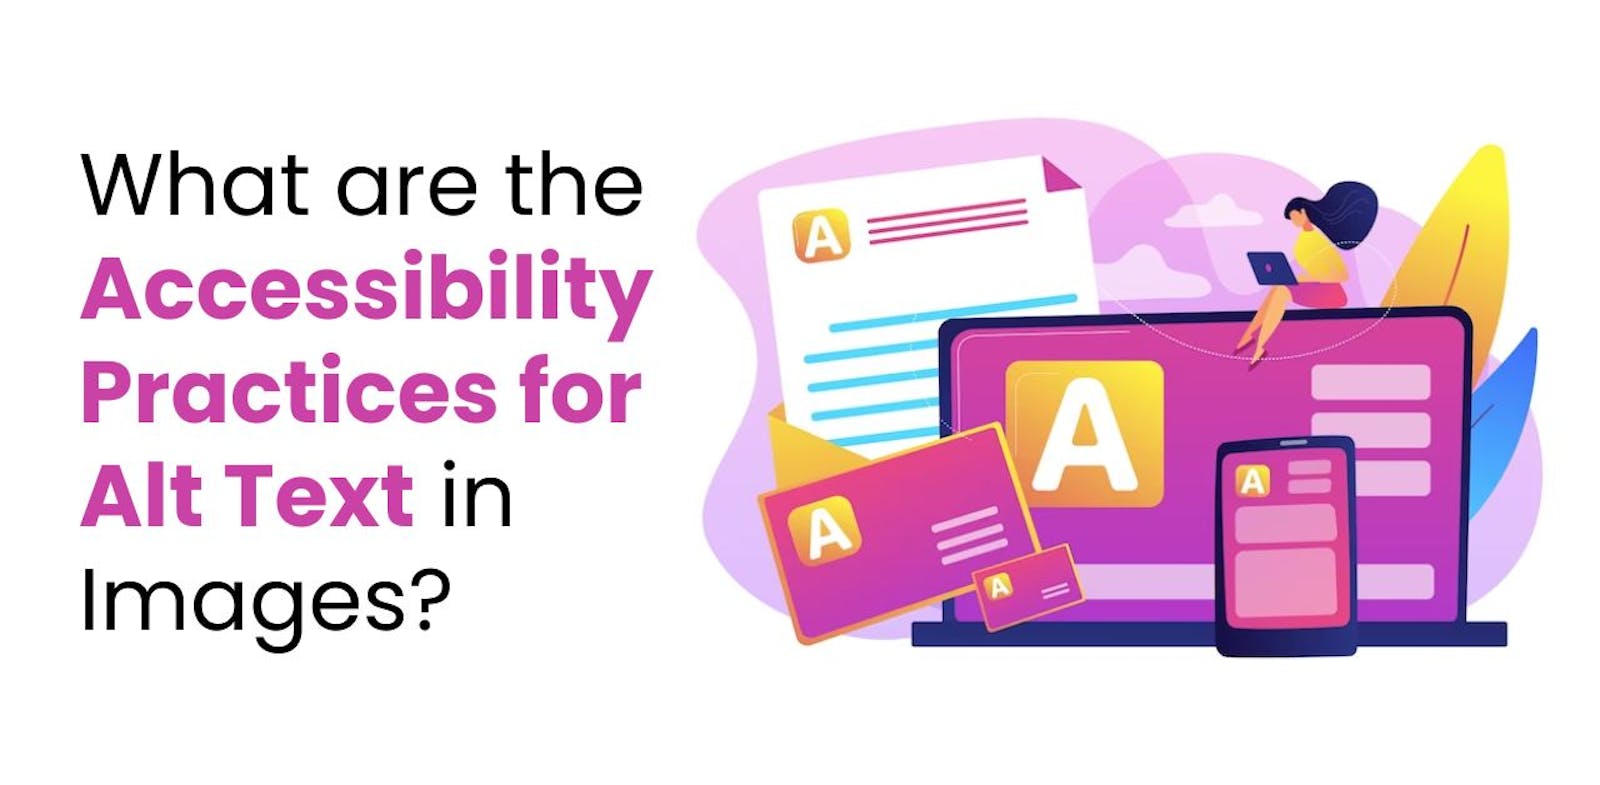 What are the Accessibility Practices for Alt Text in Images?